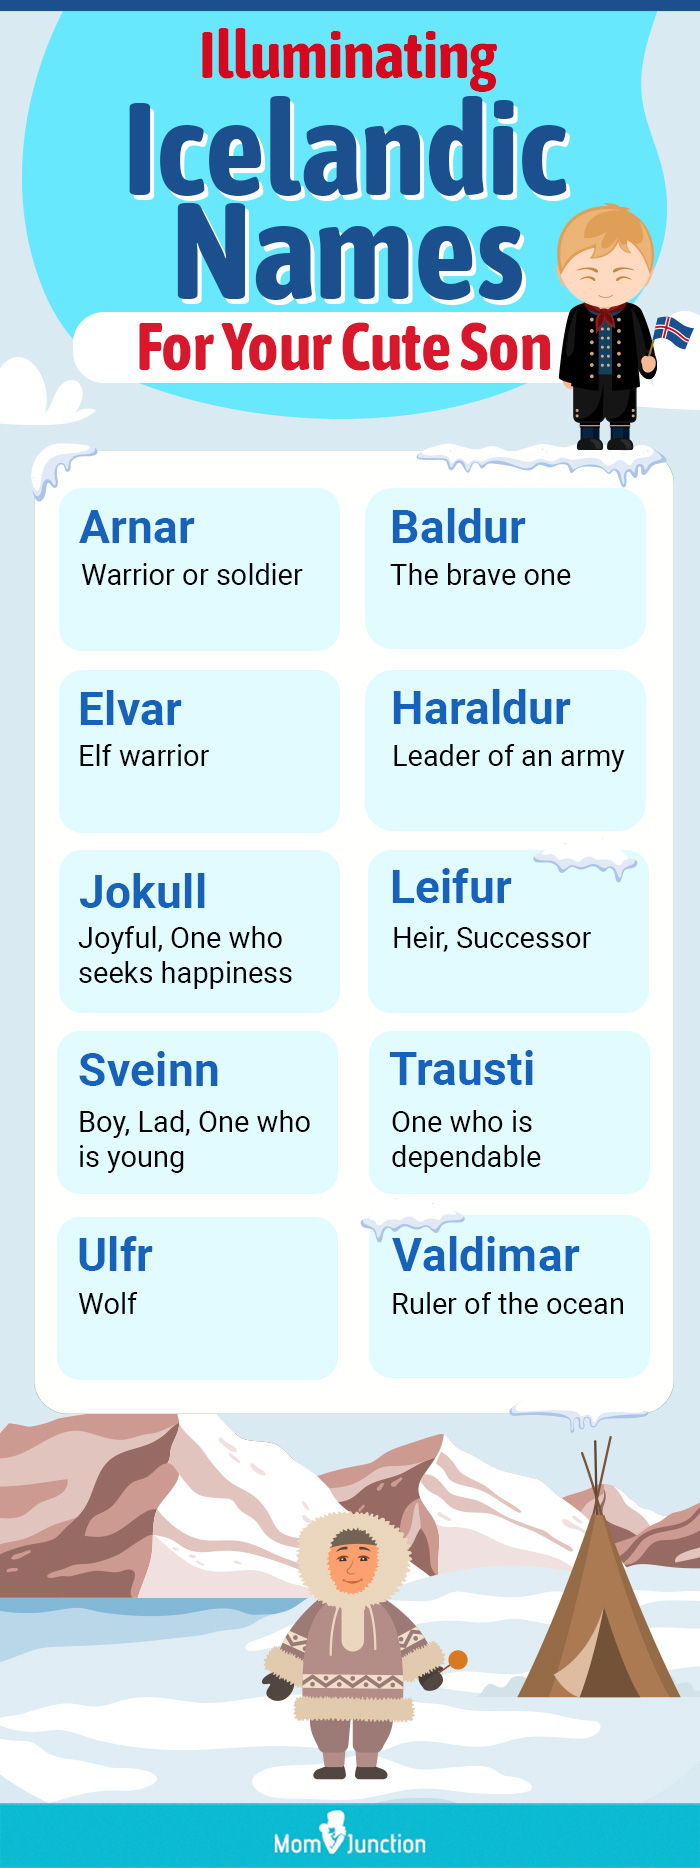 illuminating icelandic names for your cute son(infographic)